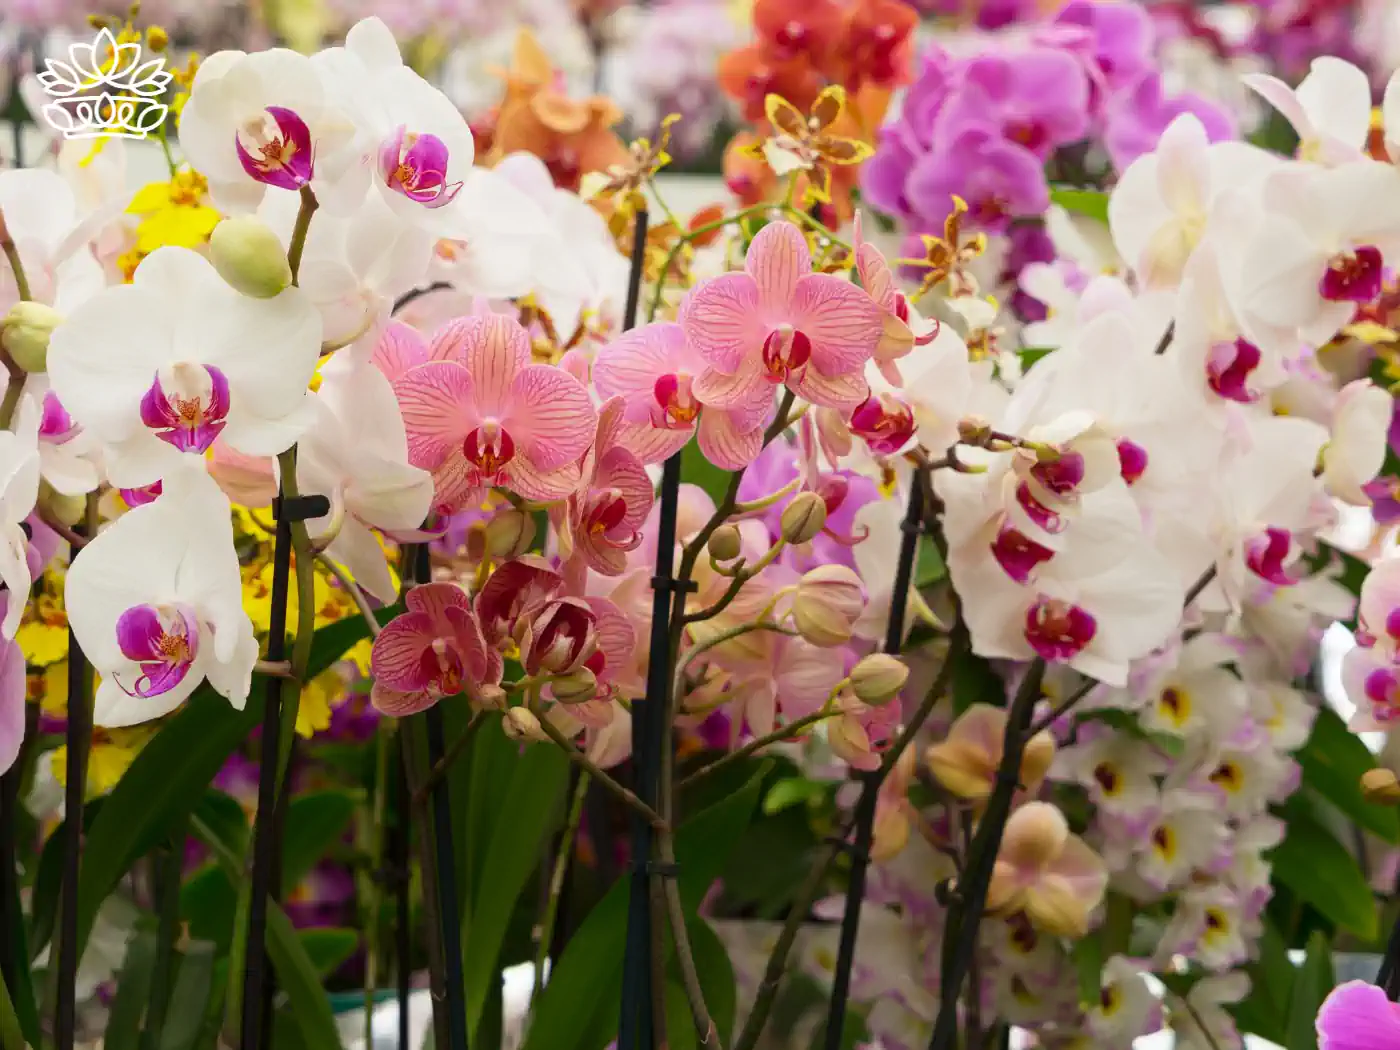 A diverse assortment of orchids in full bloom, featuring pink, white, and purple flowers, in a display. Fabulous Flowers and Gifts - Orchids Collection.